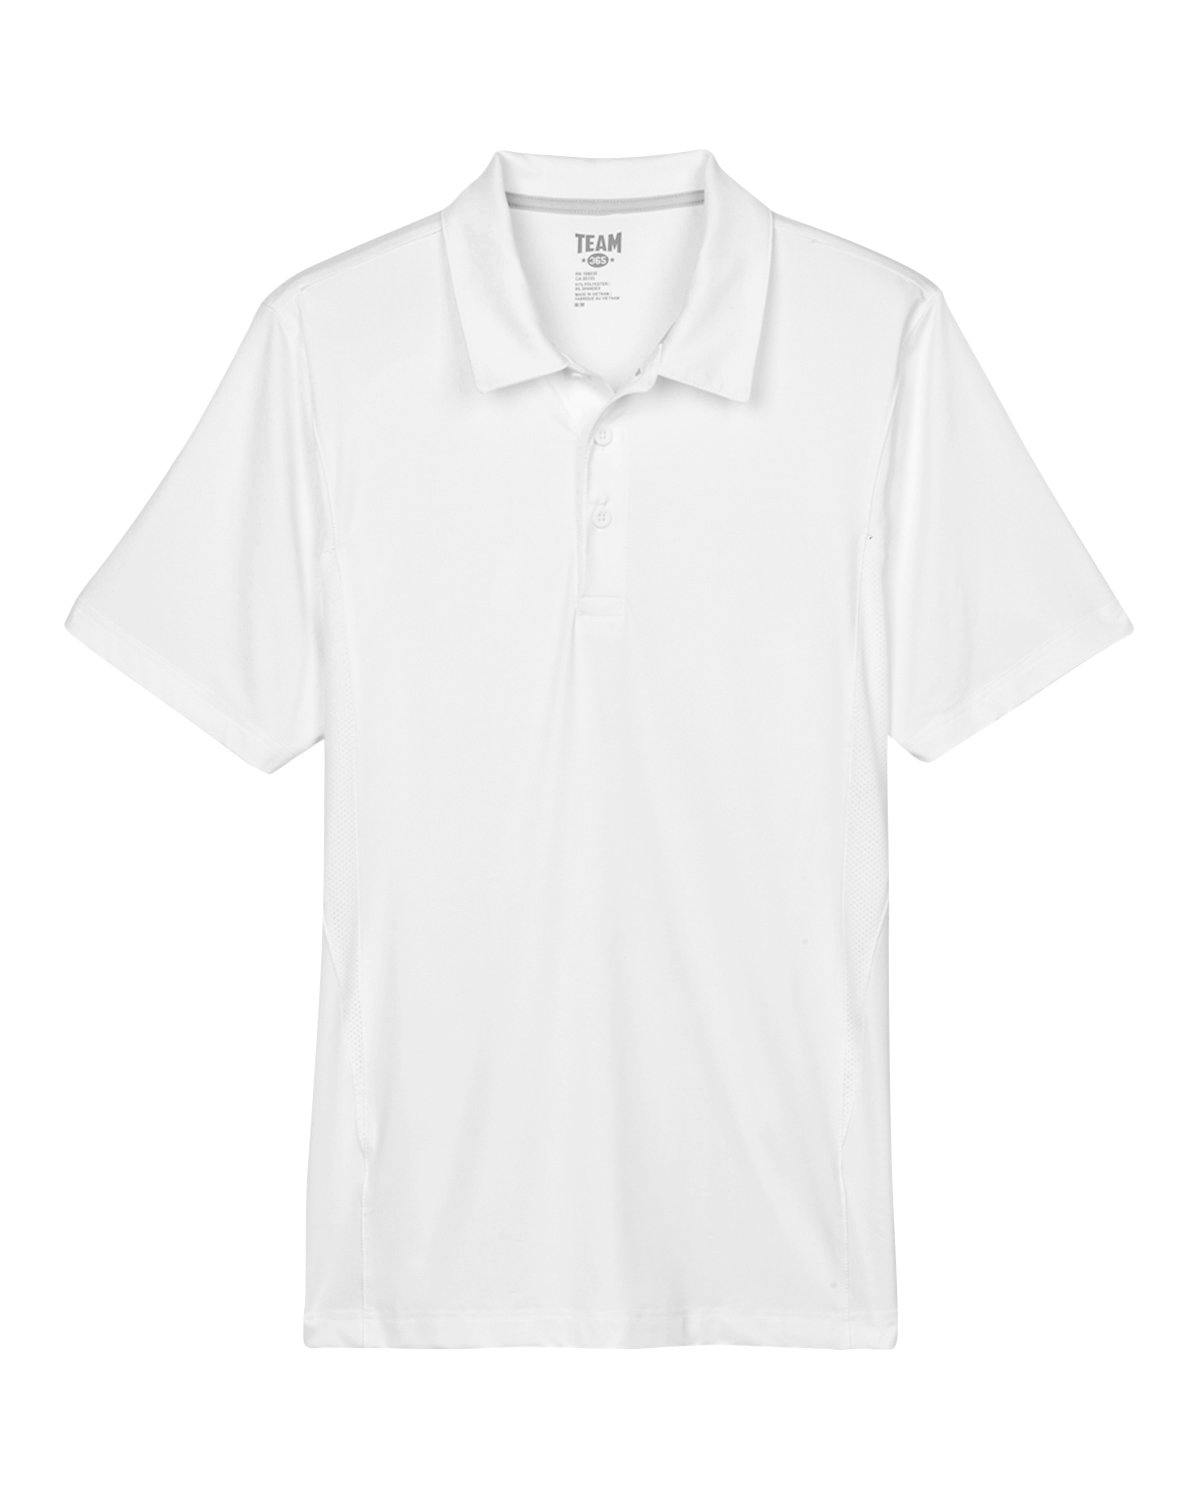 Image for Men's Charger Performance Polo